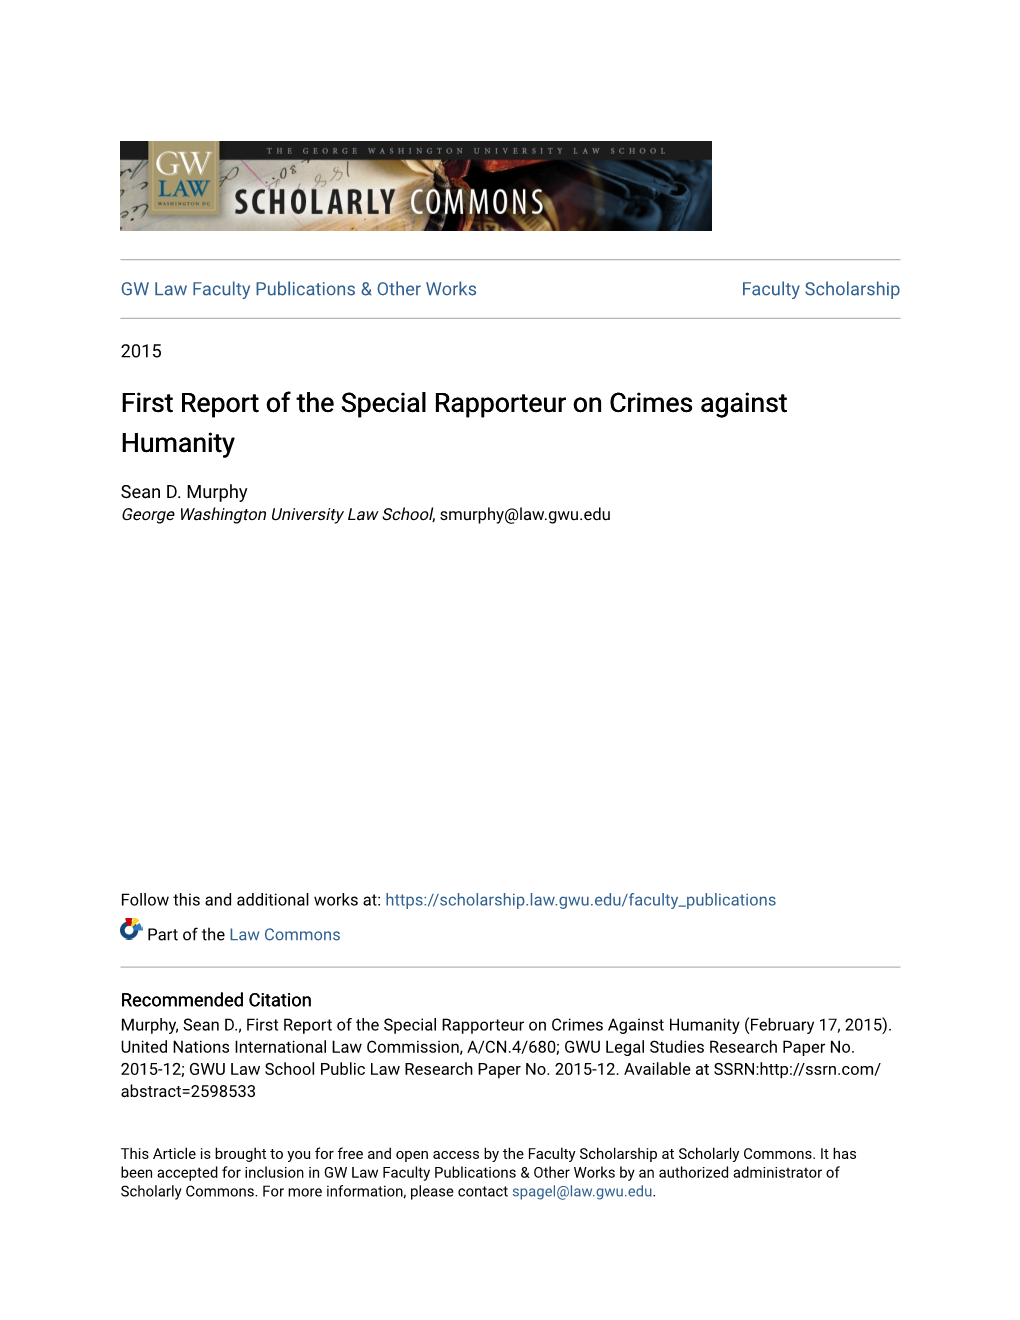 First Report of the Special Rapporteur on Crimes Against Humanity